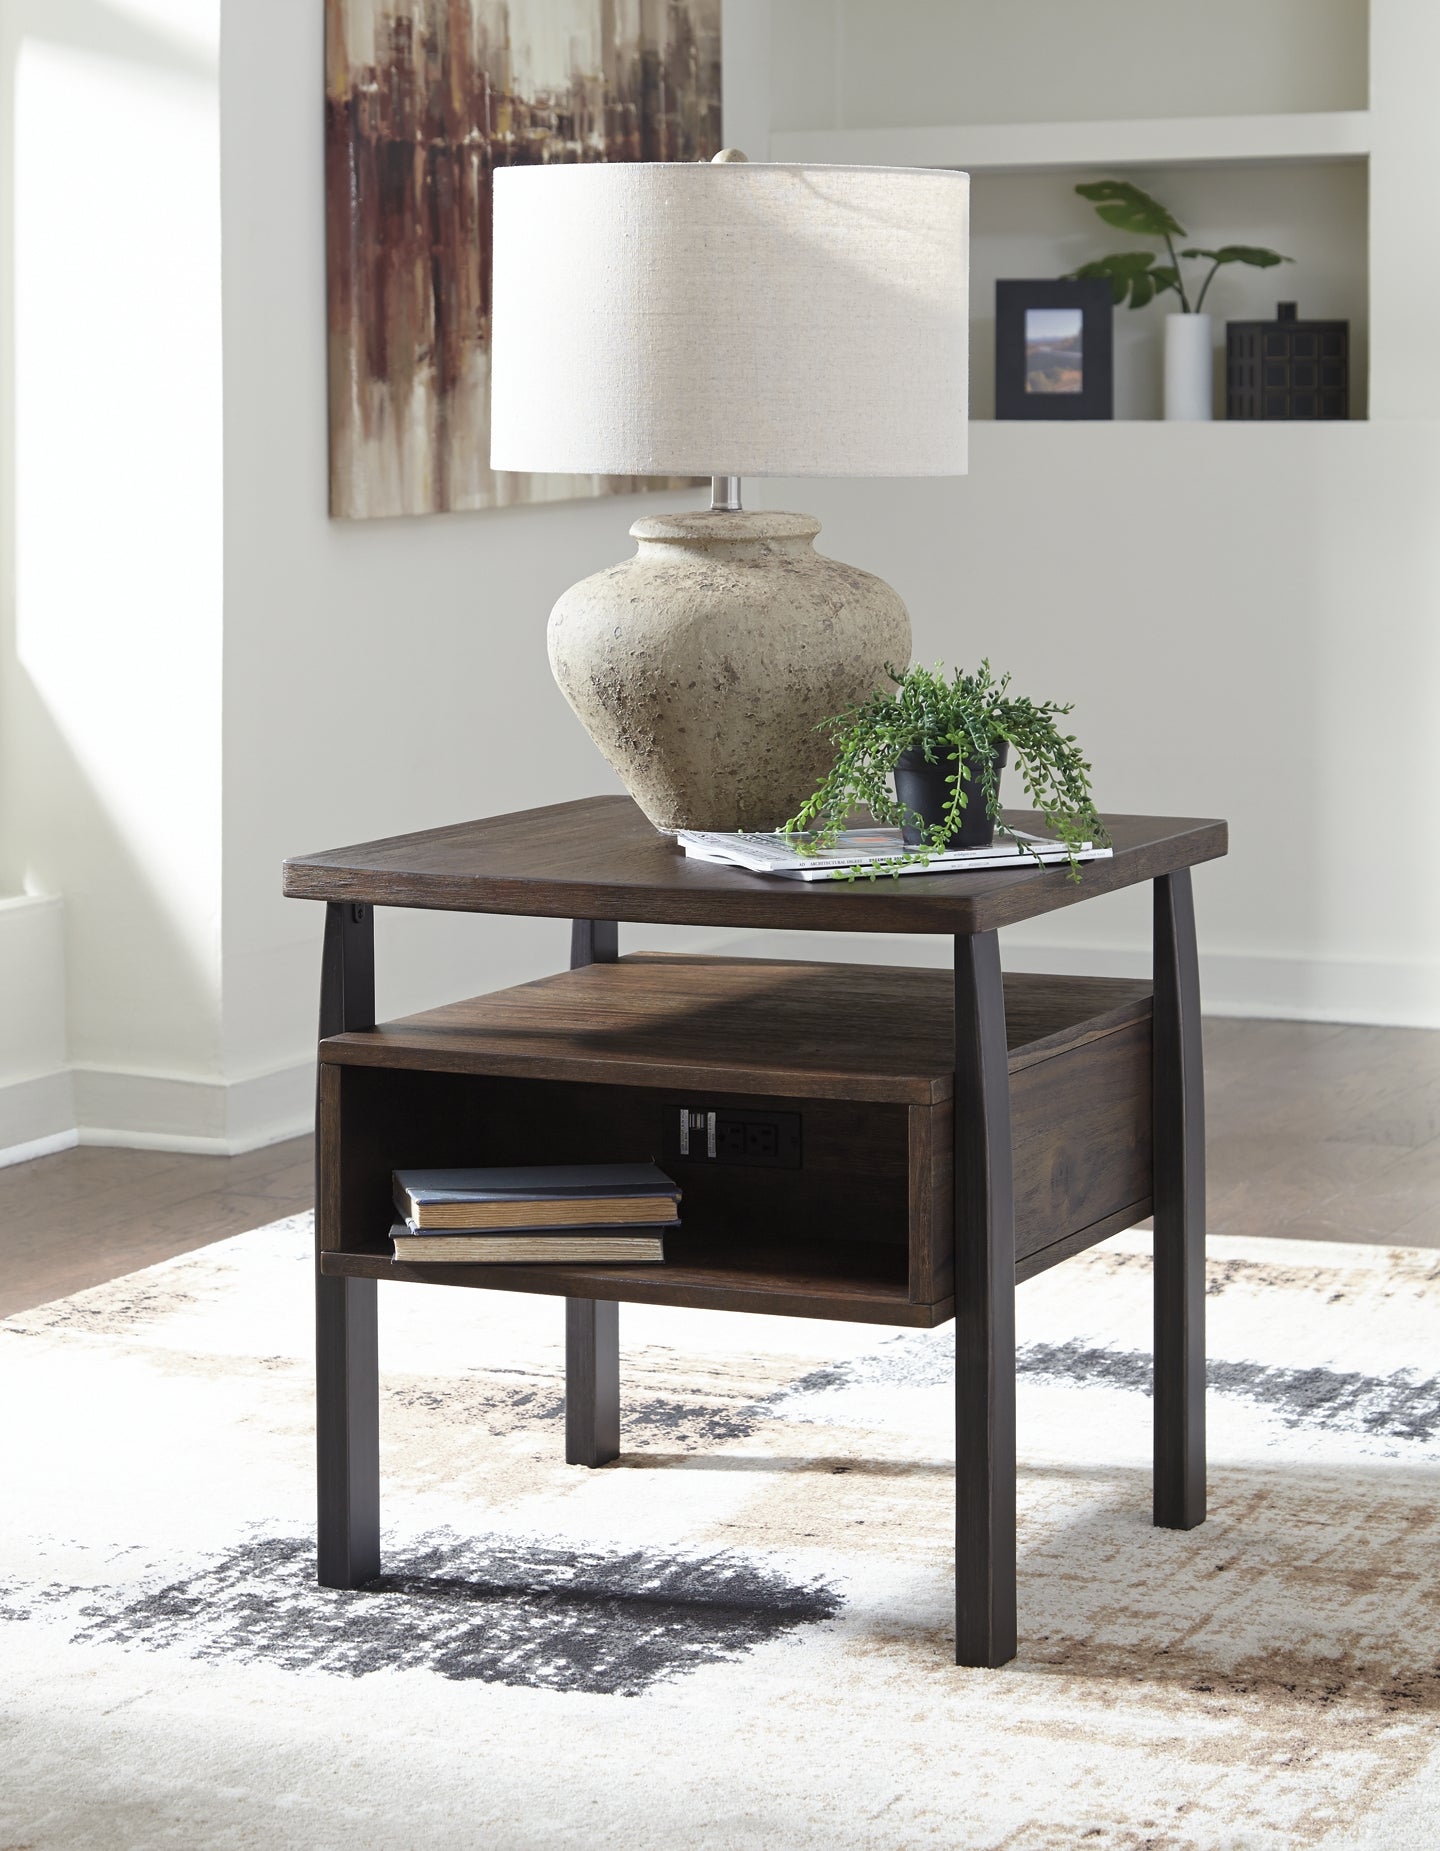 Vailbry Rectangular End Table at Walker Mattress and Furniture Locations in Cedar Park and Belton TX.